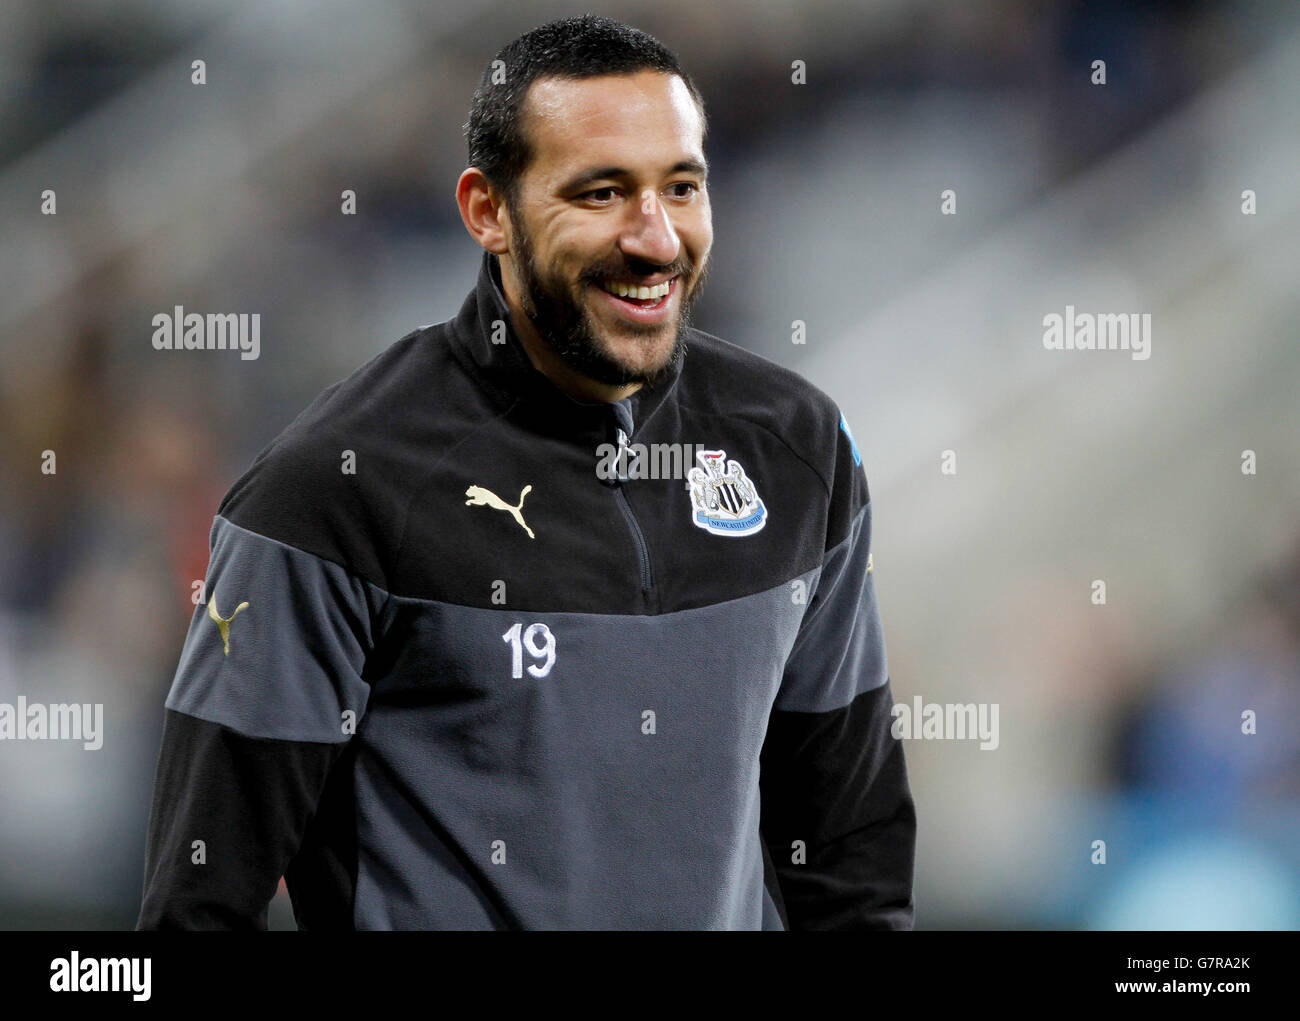 Newcastle United's Jonas Gutierrez before the Barclays Premier League match at St James' Park, Newcastle. PRESS ASSOCIATION Photo. Picture date: Wednesday March 4, 2015. See PA story SOCCER Newcastle. Photo credit should read: Richard Sellers/PA Wire. Stock Photo